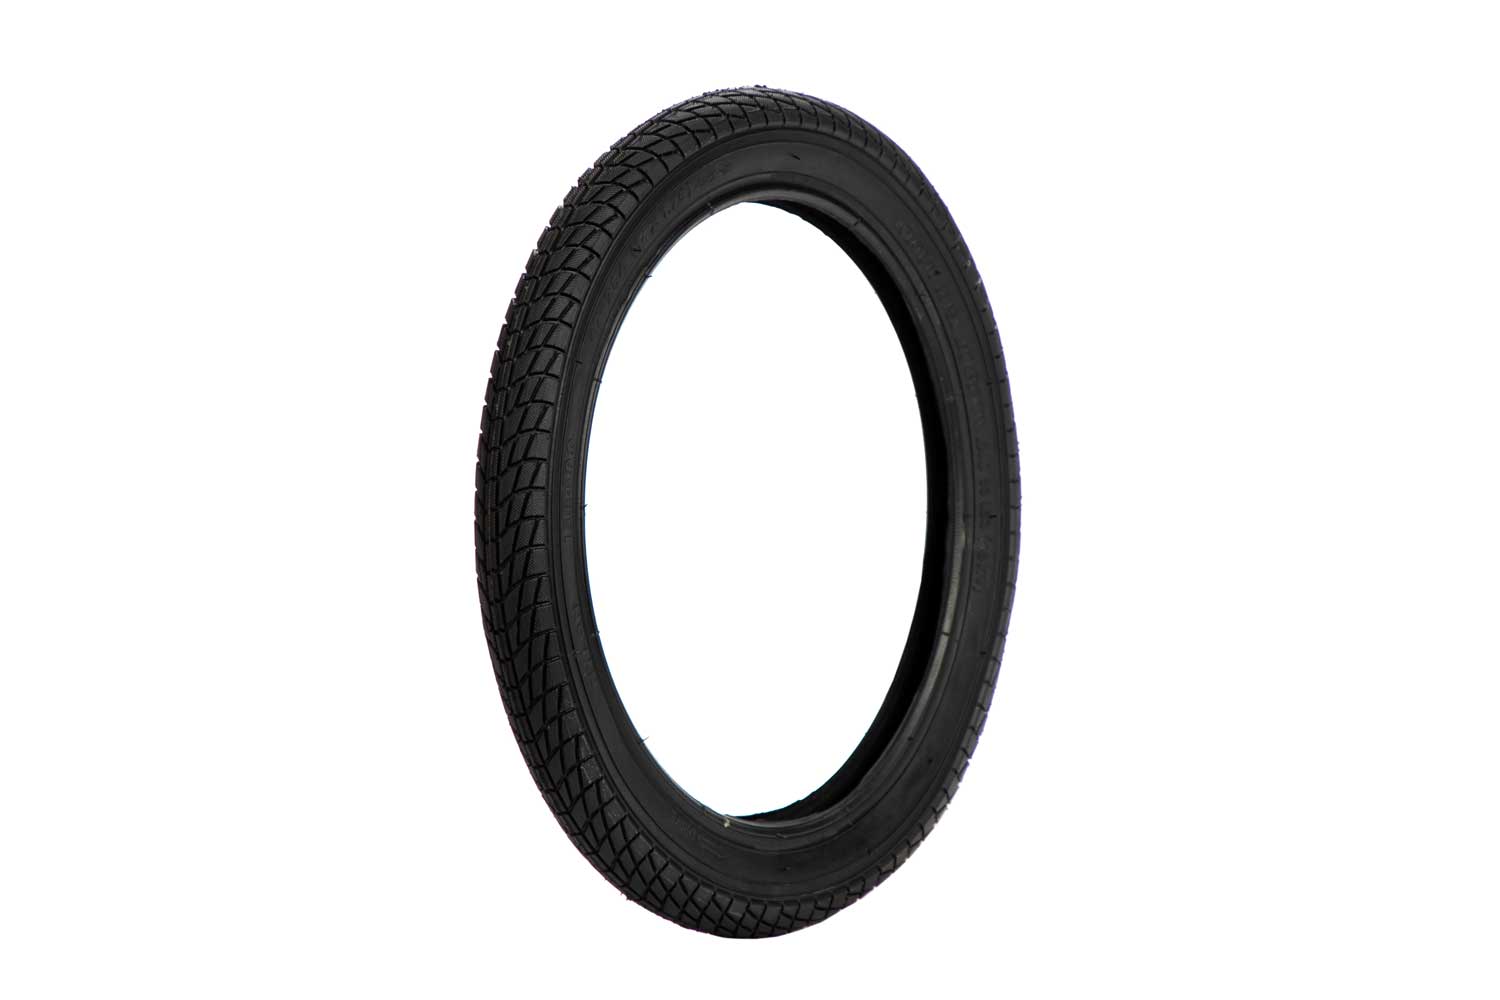 OEM Strider Tire - 14x1.75 - Downtown Bicycle Works 